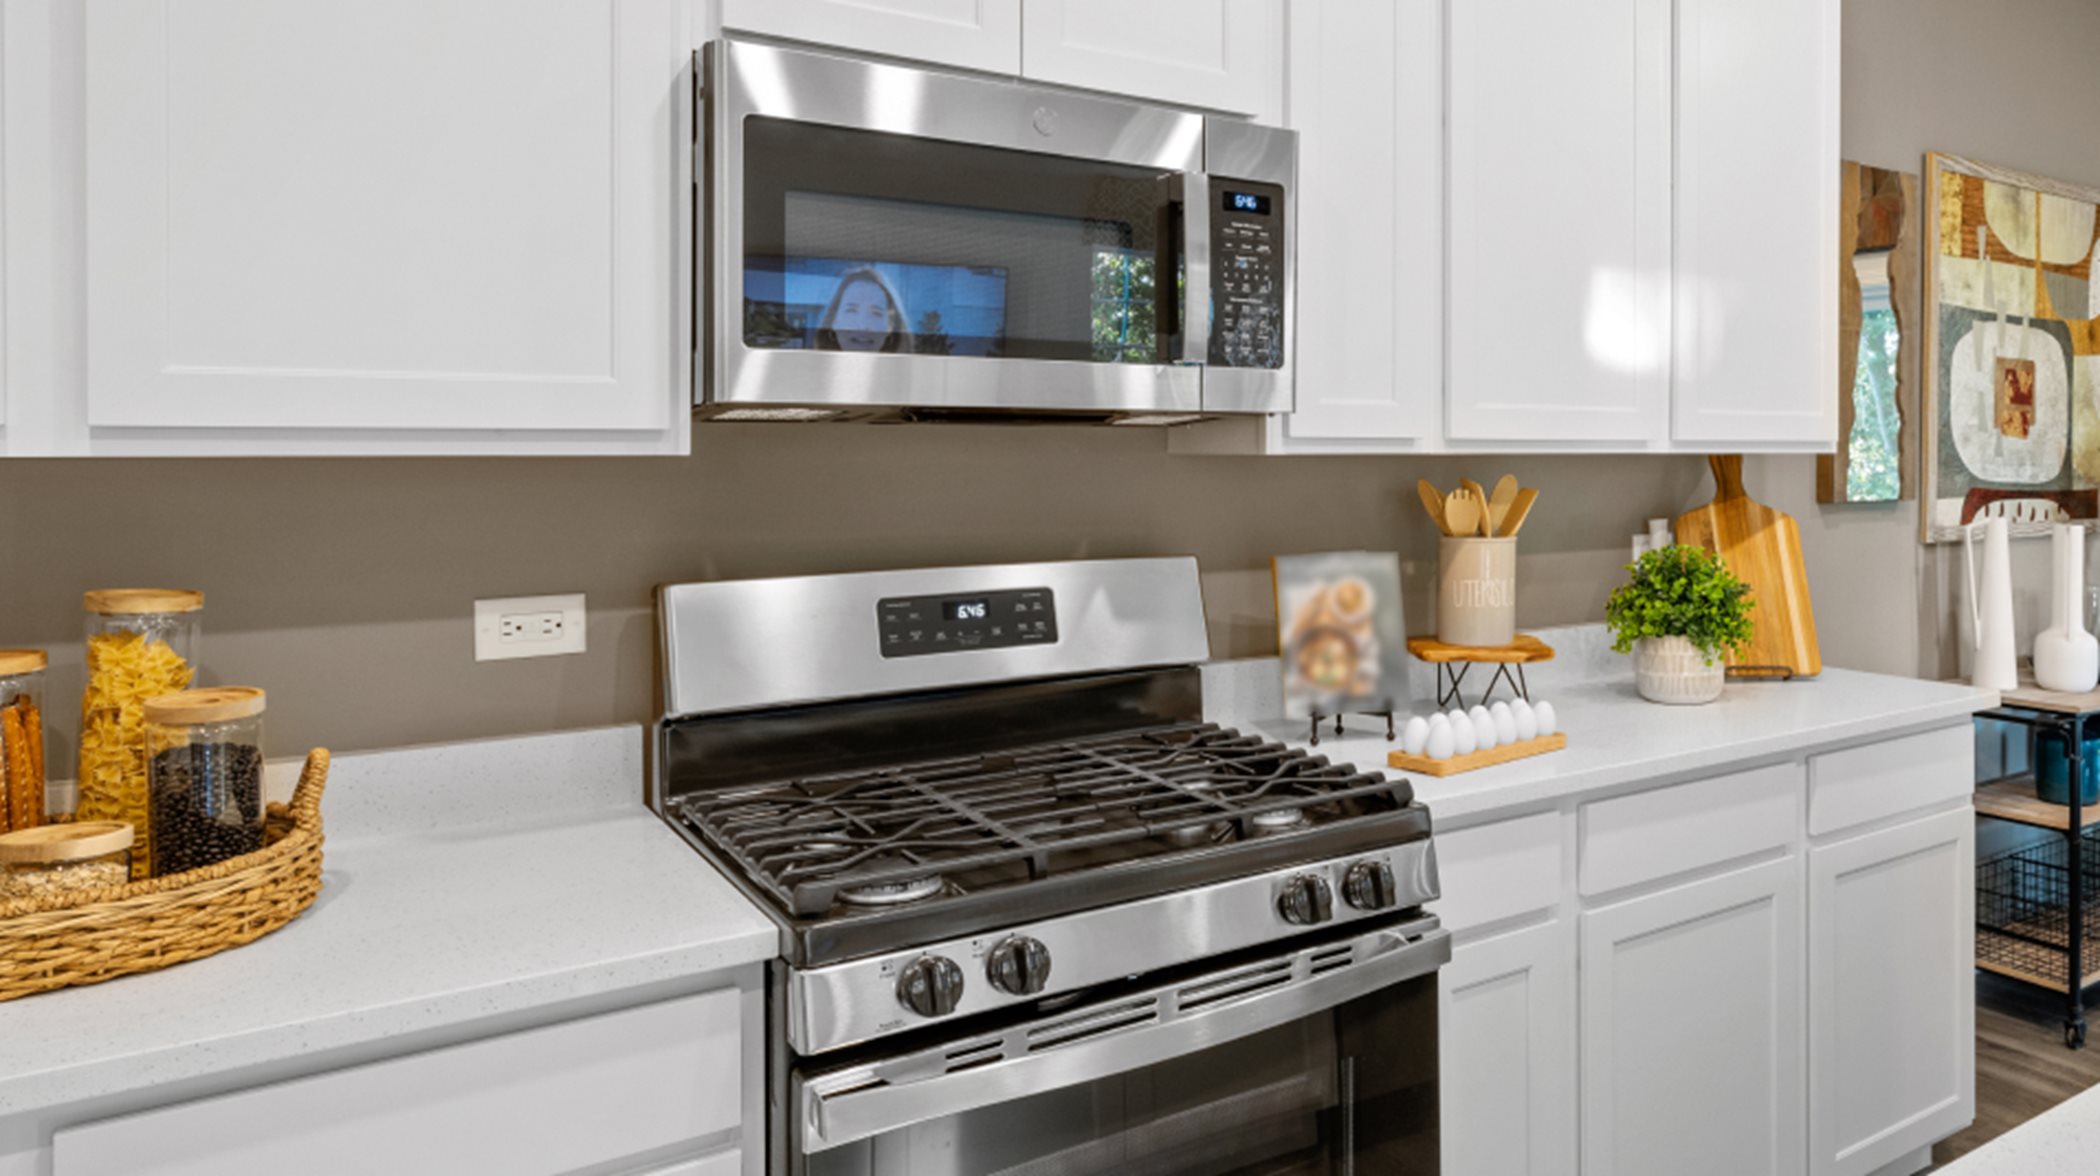 Darcy GE stainless steel kitchen appliance package includes a built-in microwave and 4-burner gas range